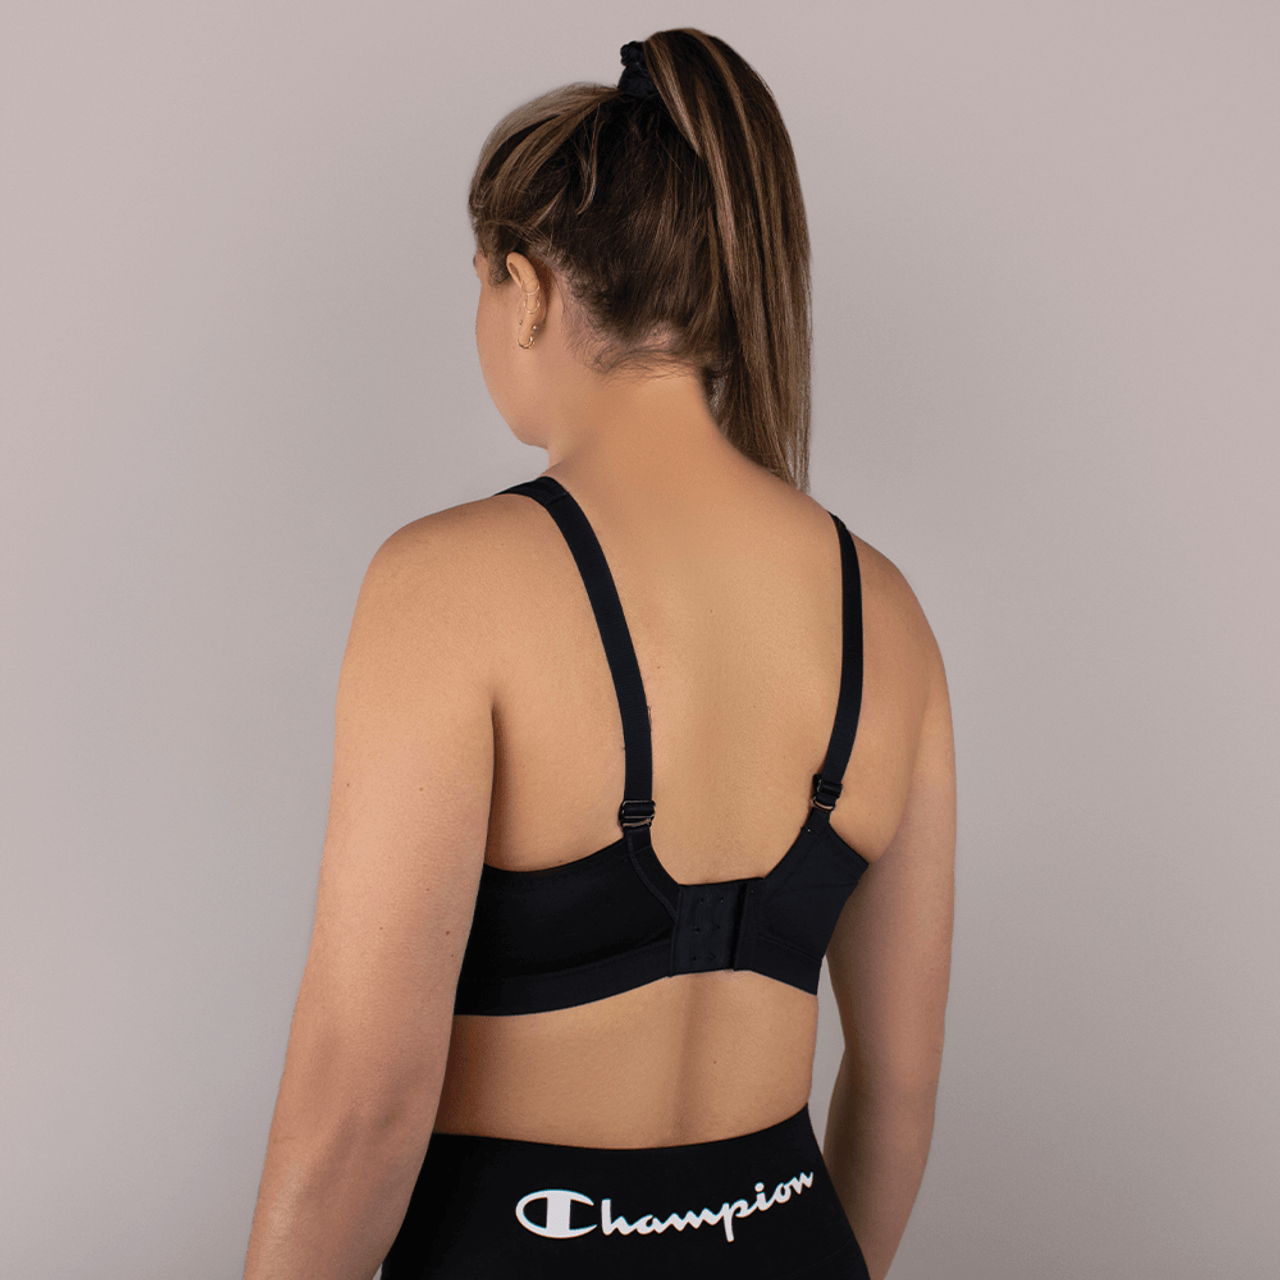 Active D+ Max Support Sports Bra, Sports Bras